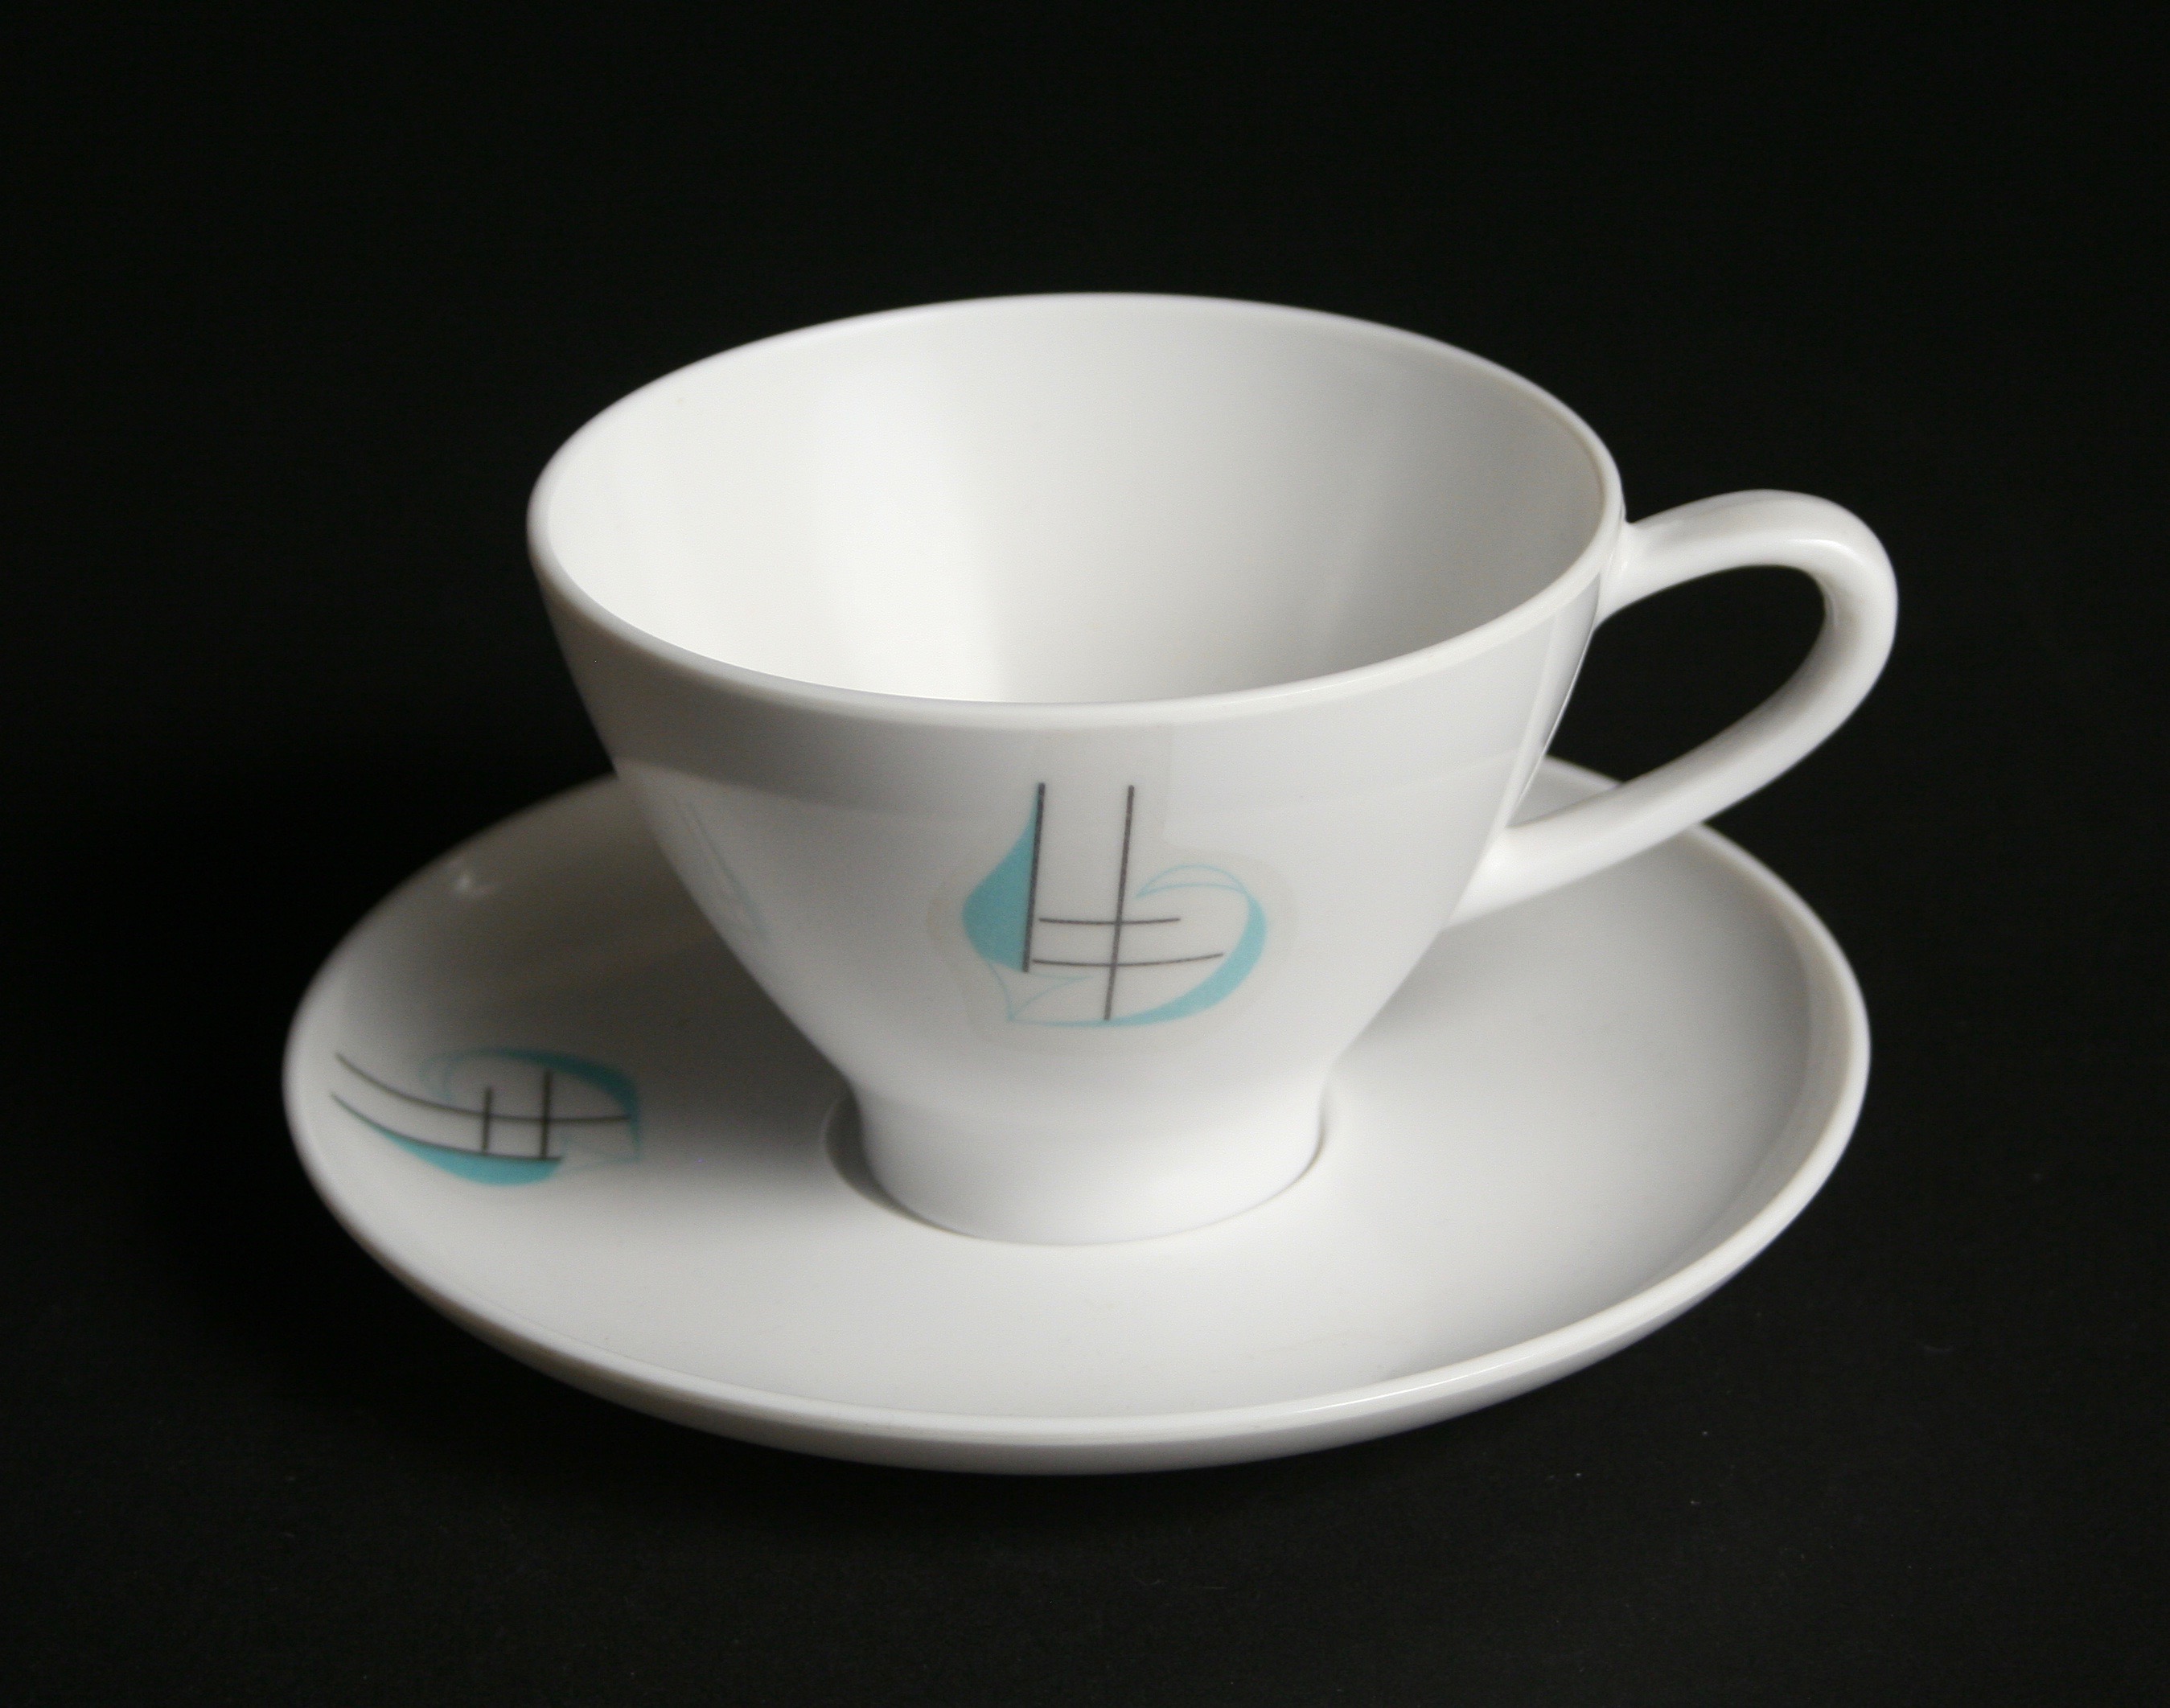 Hitkari Tableware - Did you know: These small cups are called 'demitasse'  in French meaning 'half cup' and are used to serve Turkish coffee or  espresso. For enquiries or details please contact